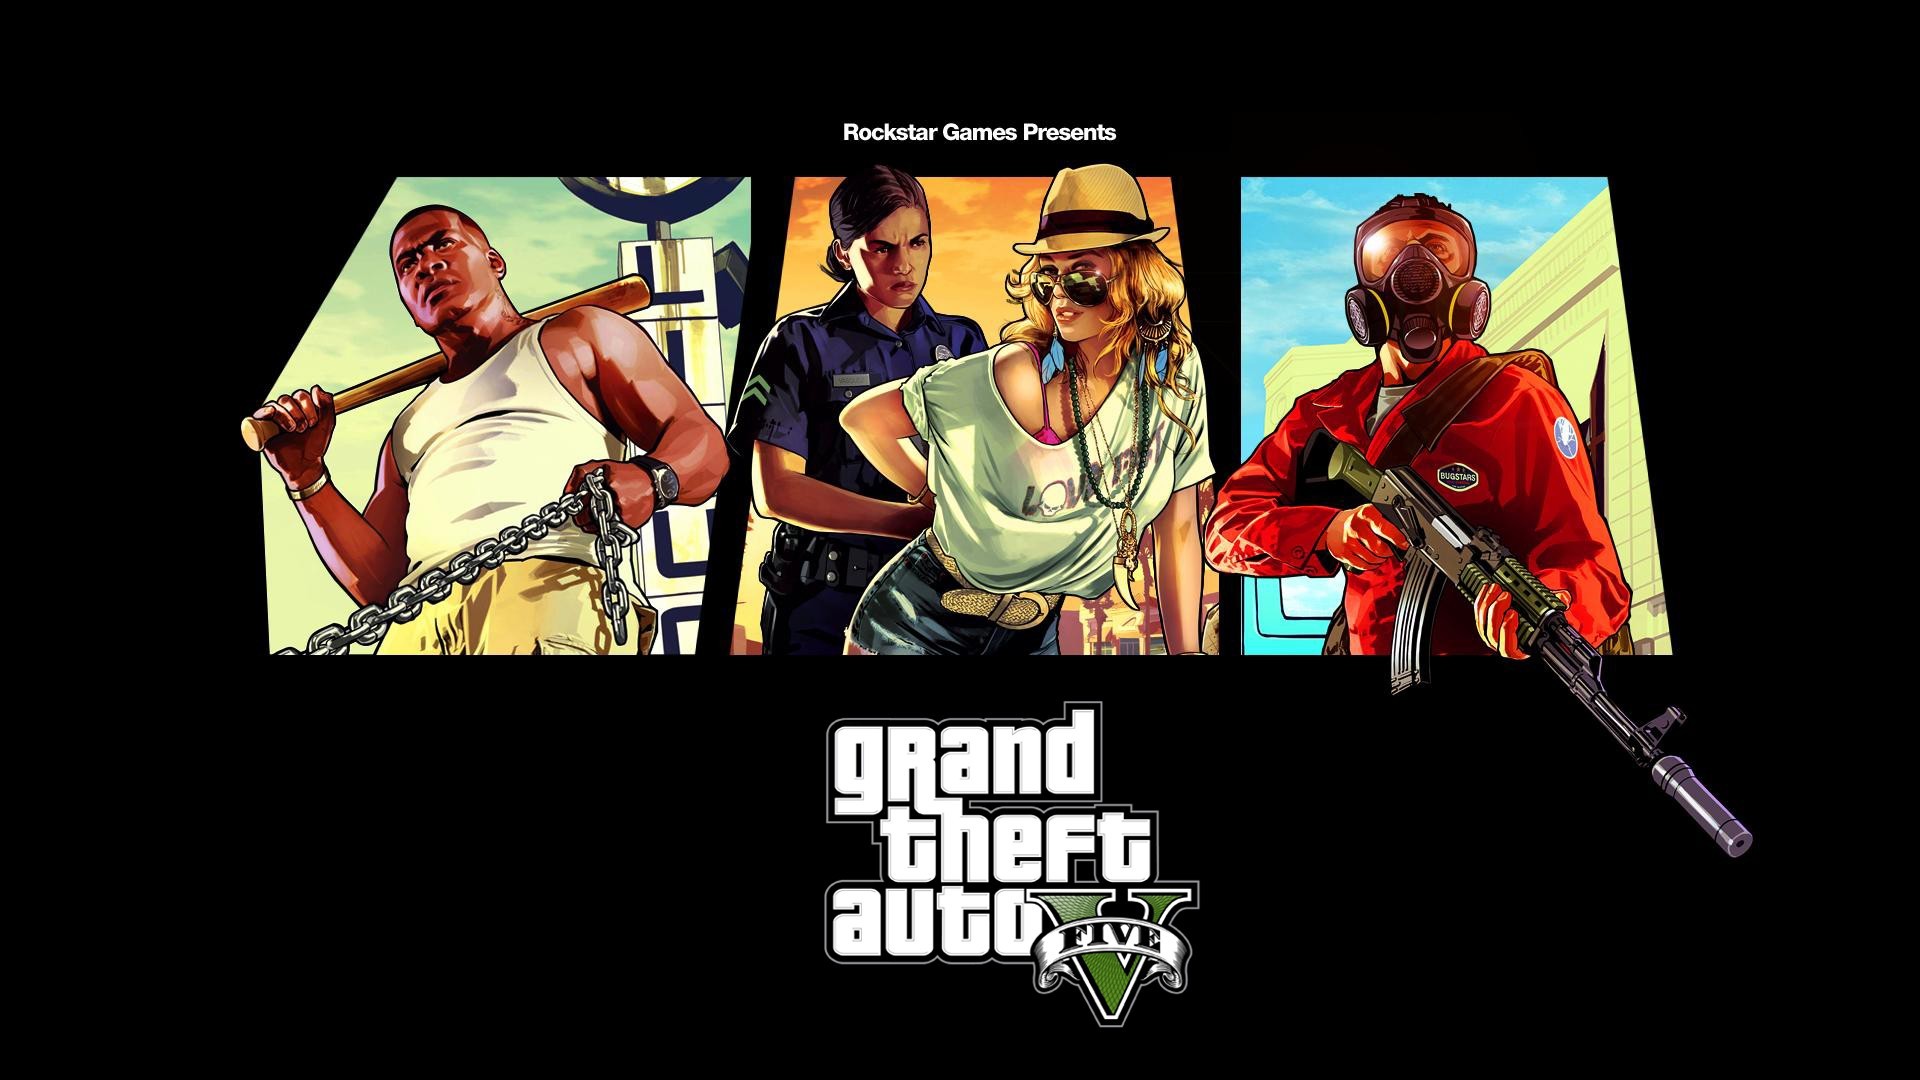 General 1920x1080 Grand Theft Auto V video games collage Rockstar Games PC gaming video game art